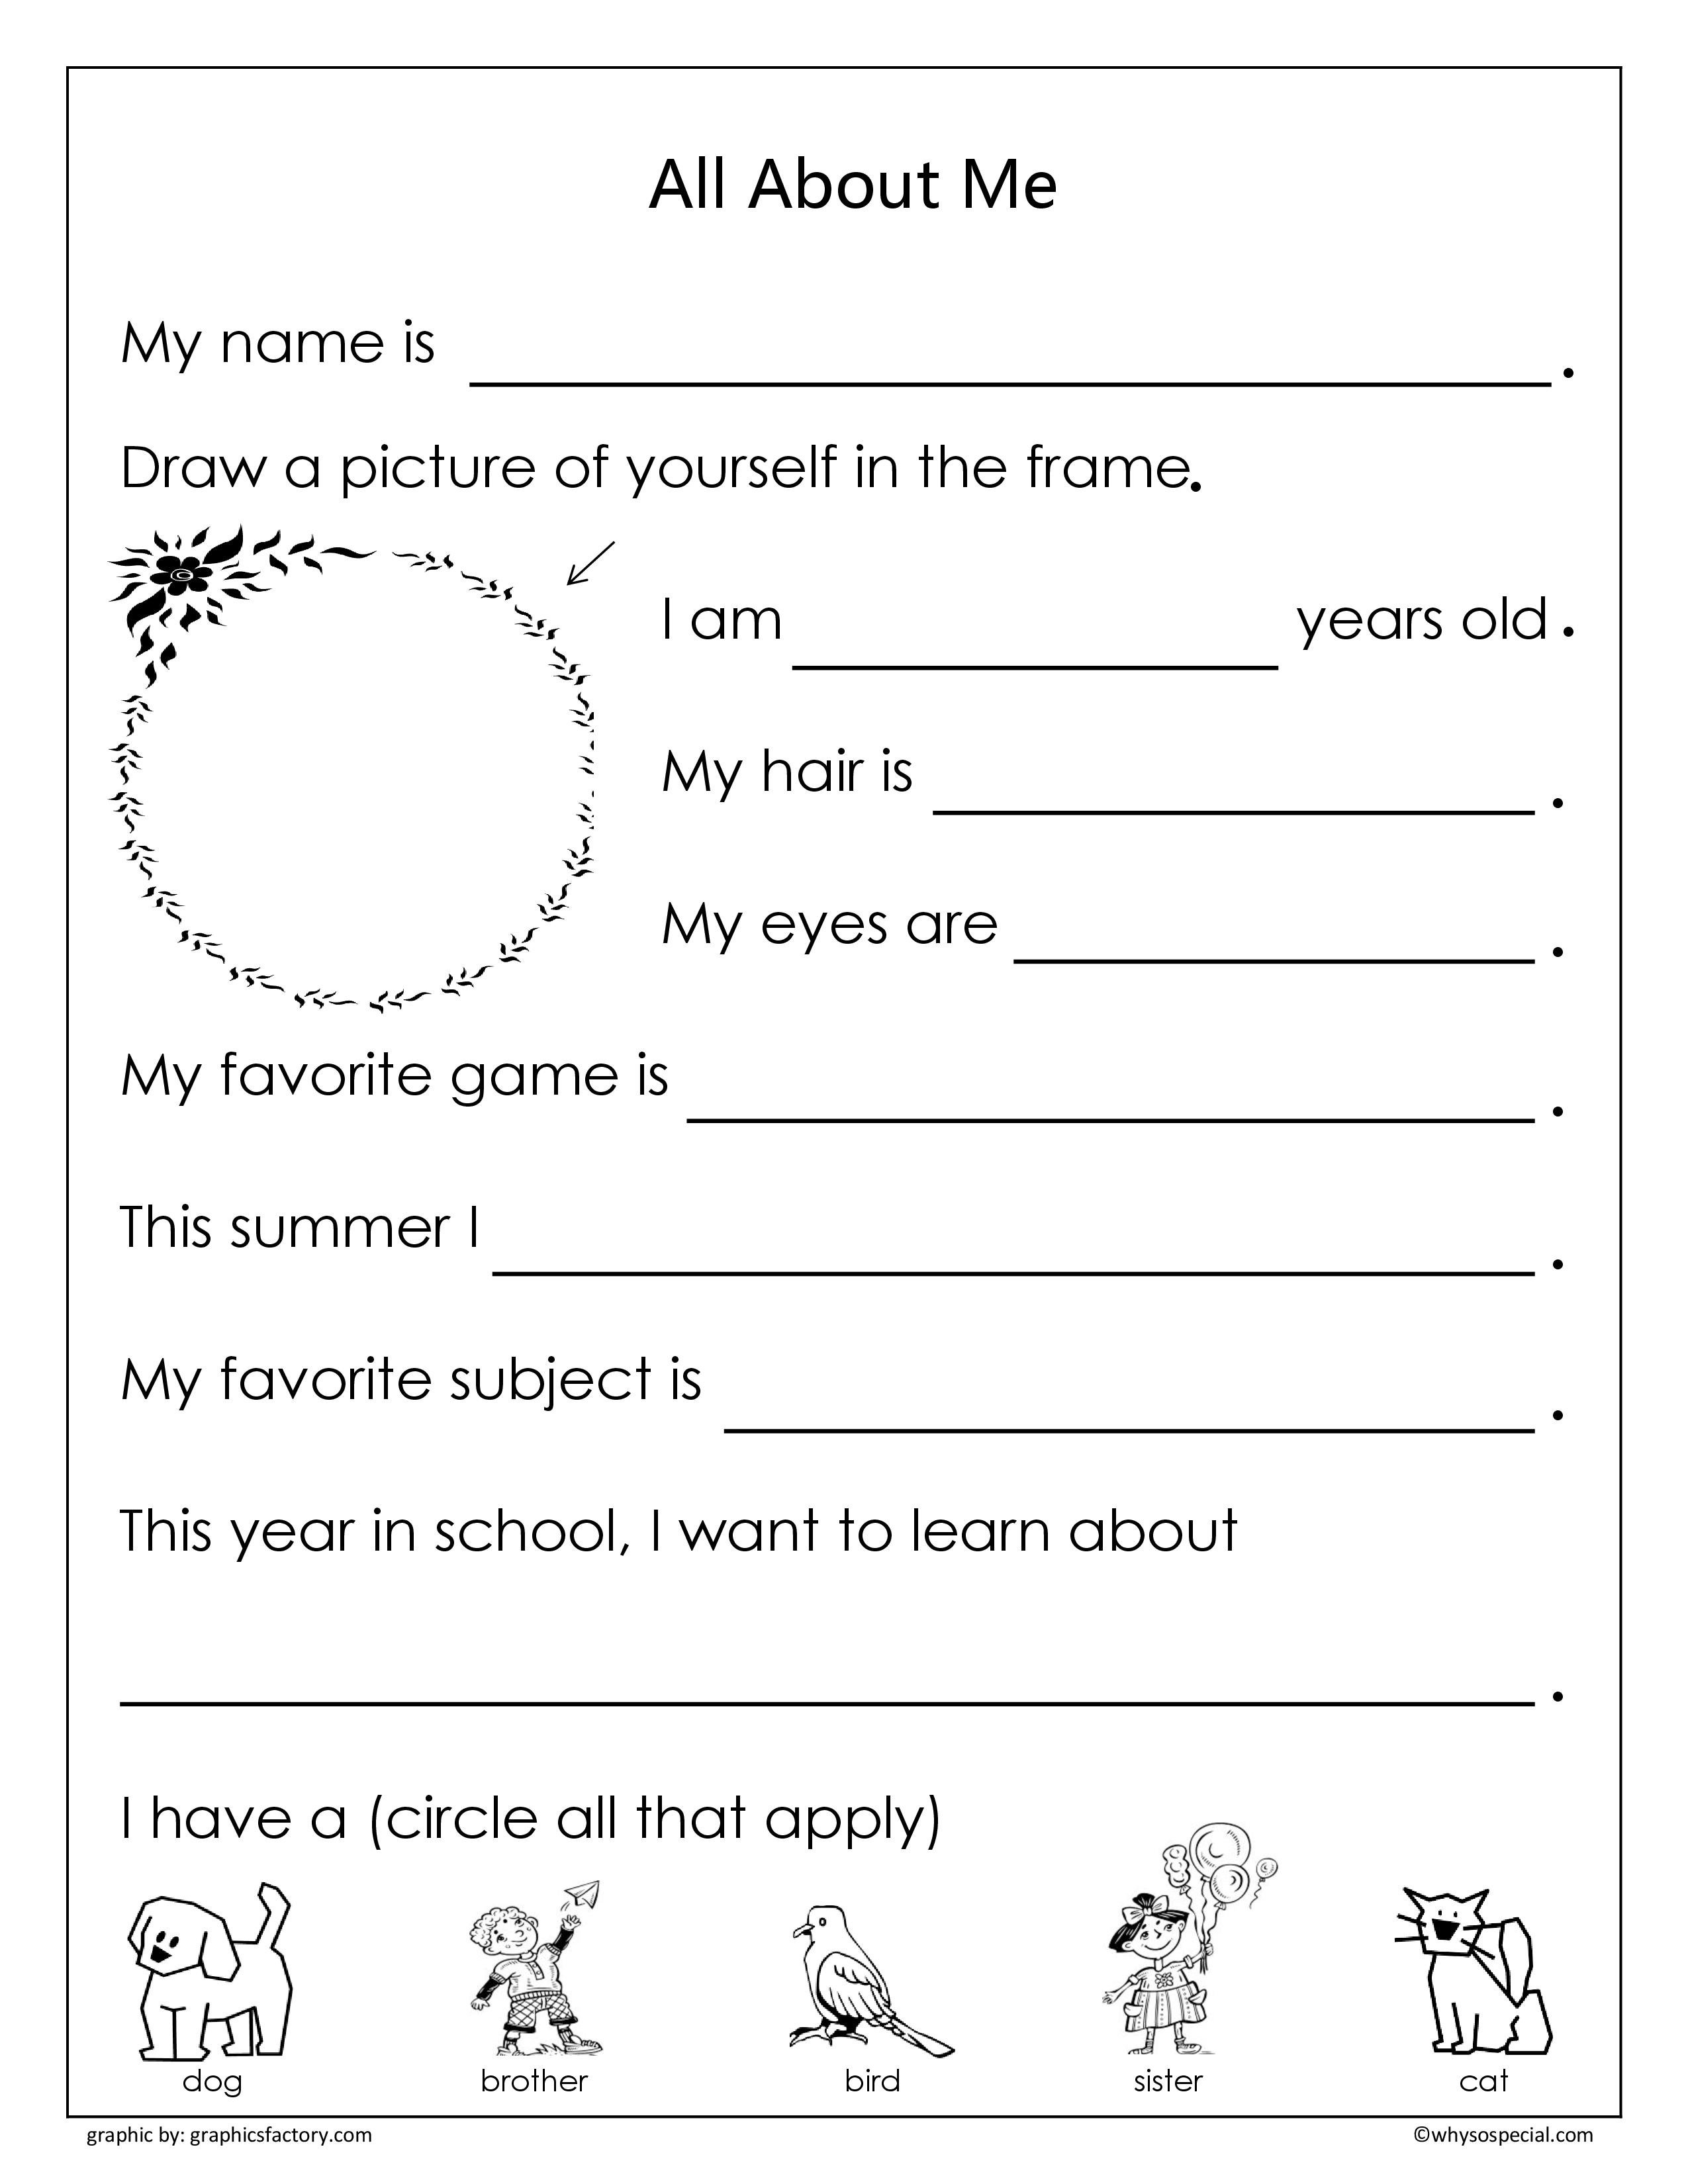 All About Me Worksheets Free Image